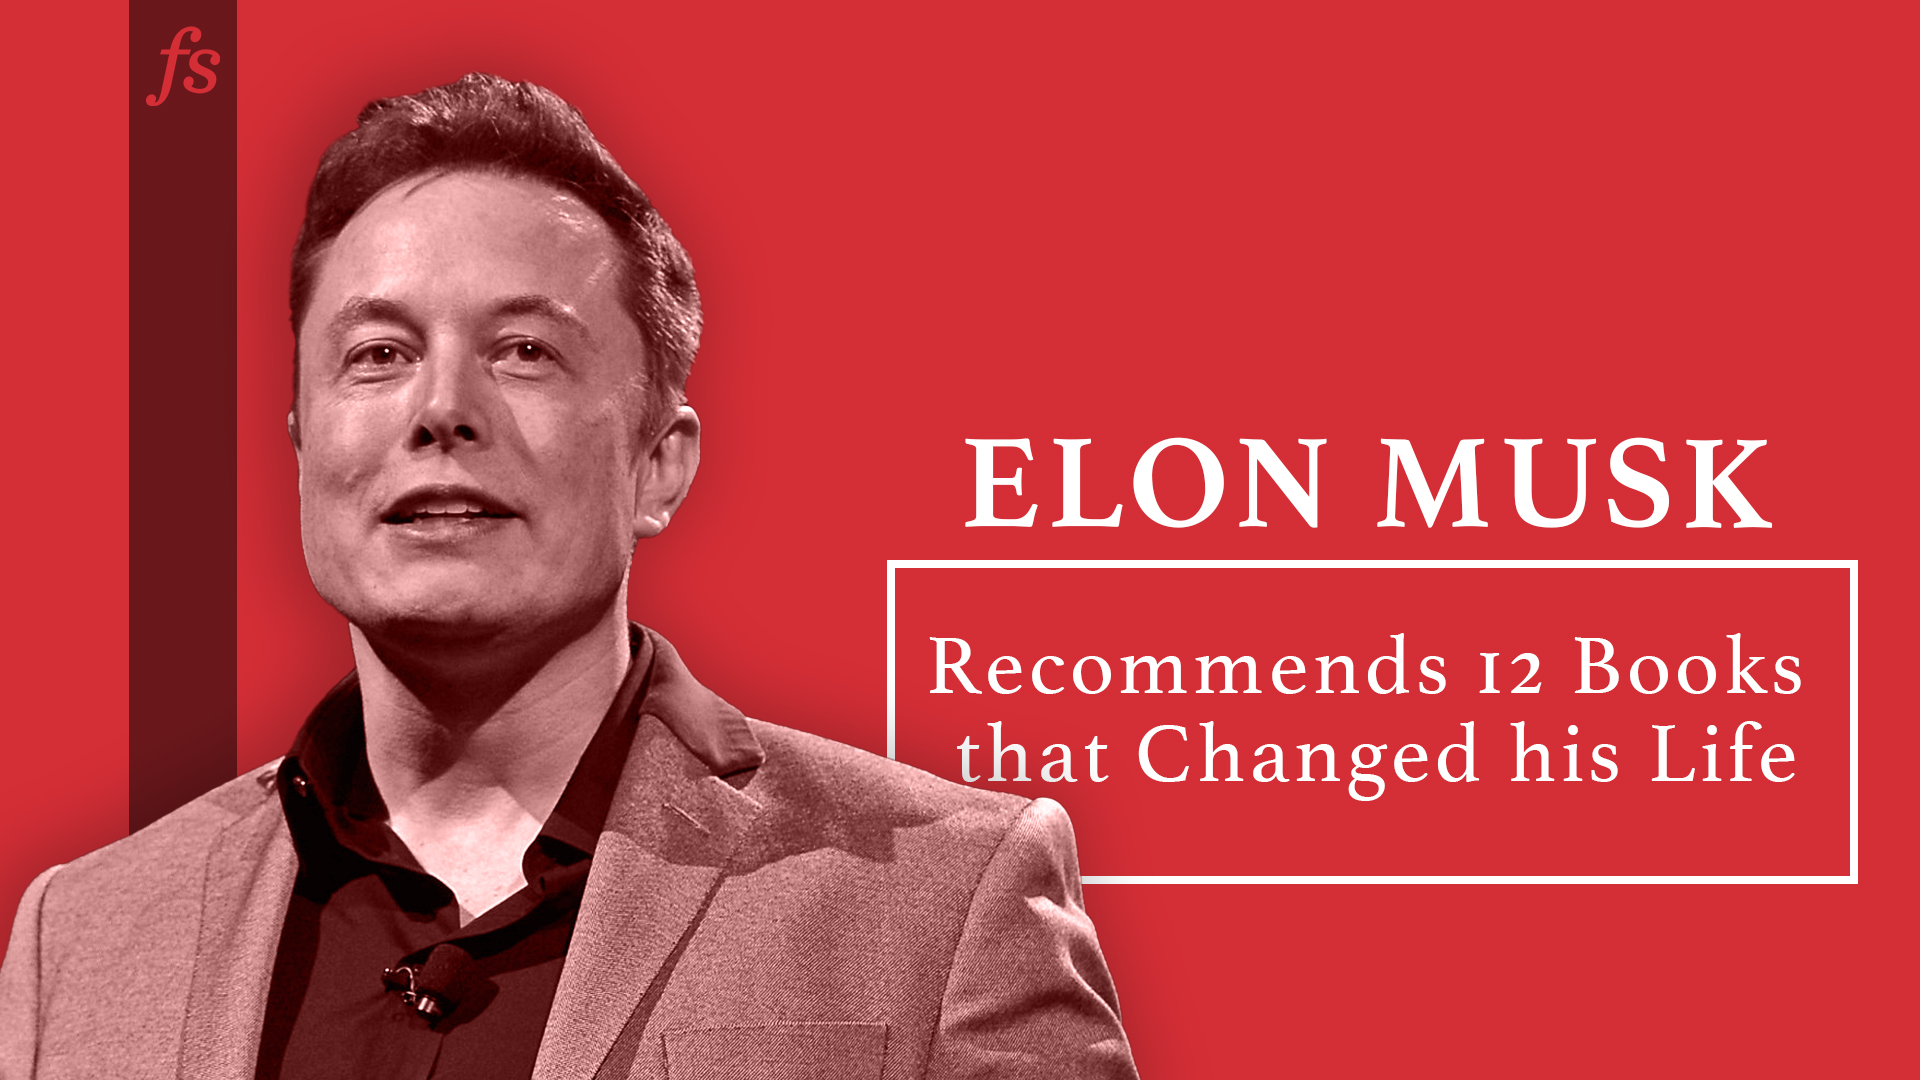 Elon Musk Recommends 12 Books that Changed his Life